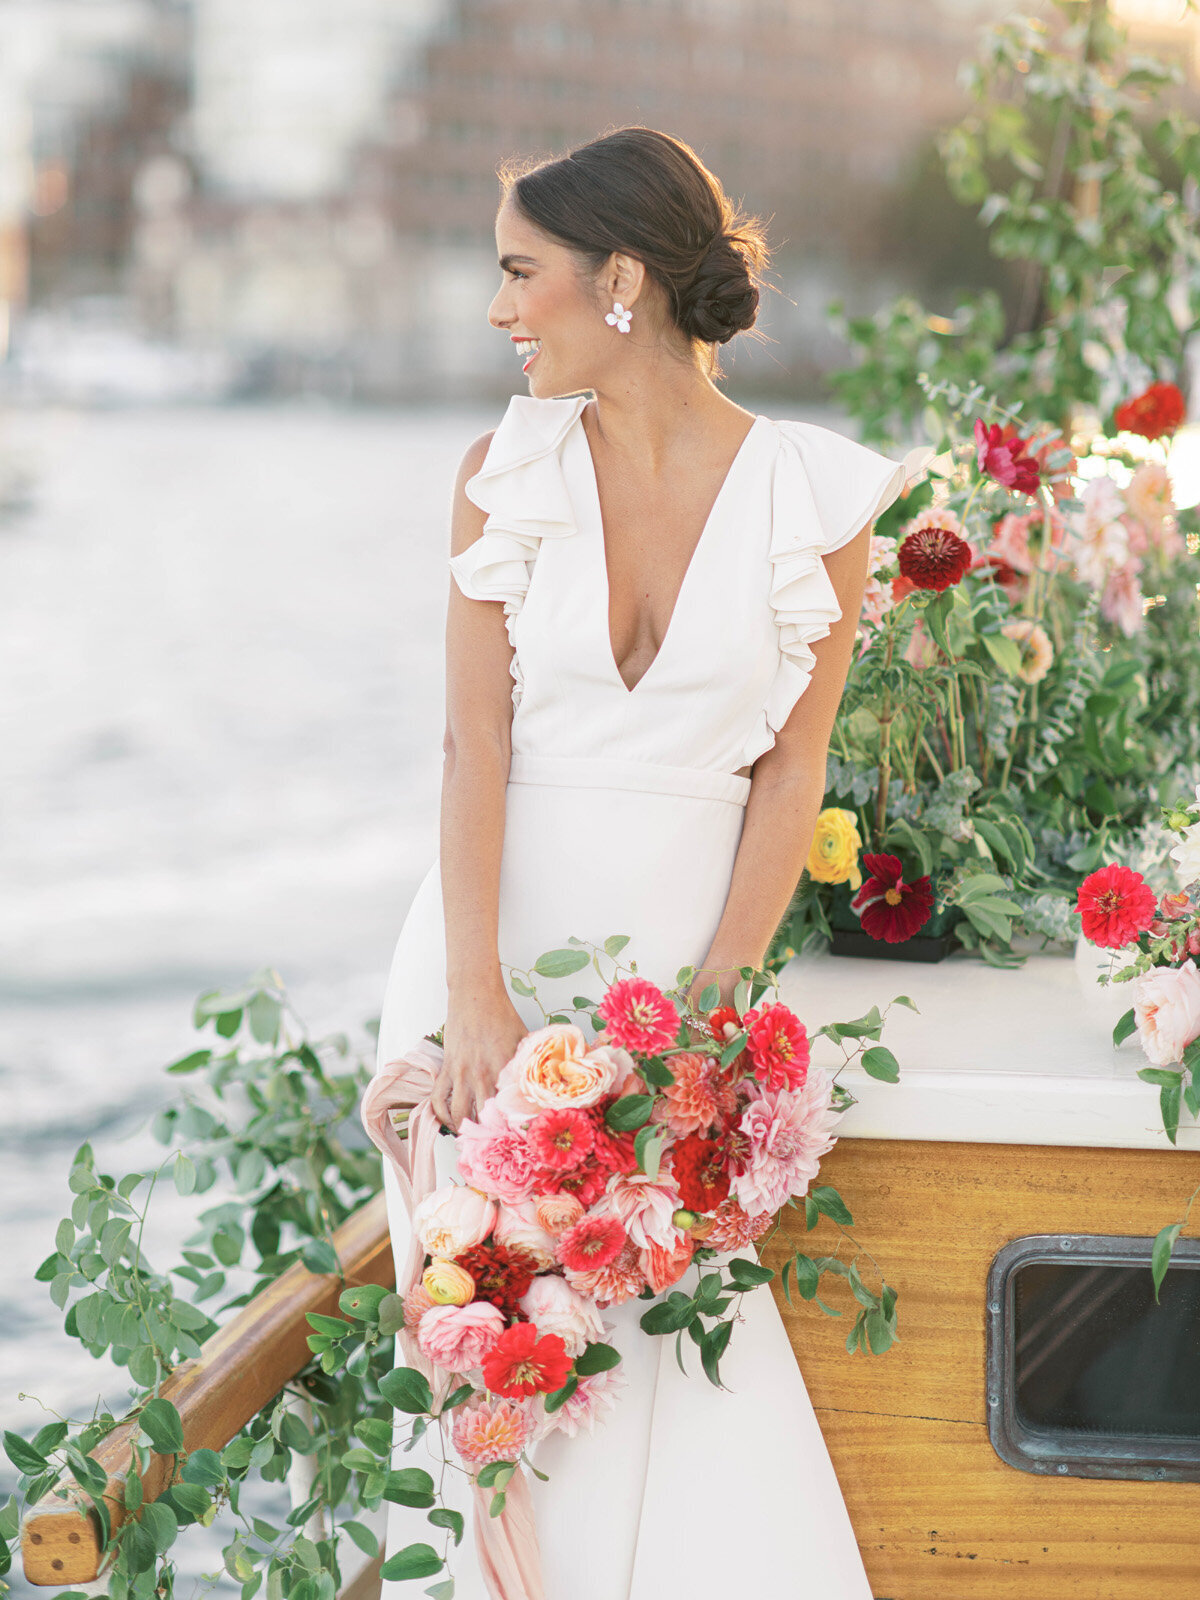 Kate-Murtaugh-Events-elopement-wedding-planner-Boston-Harbor-sailing-sail-boat-yacht-greenery-water-skyline-couple-bouquet-smiling-bride